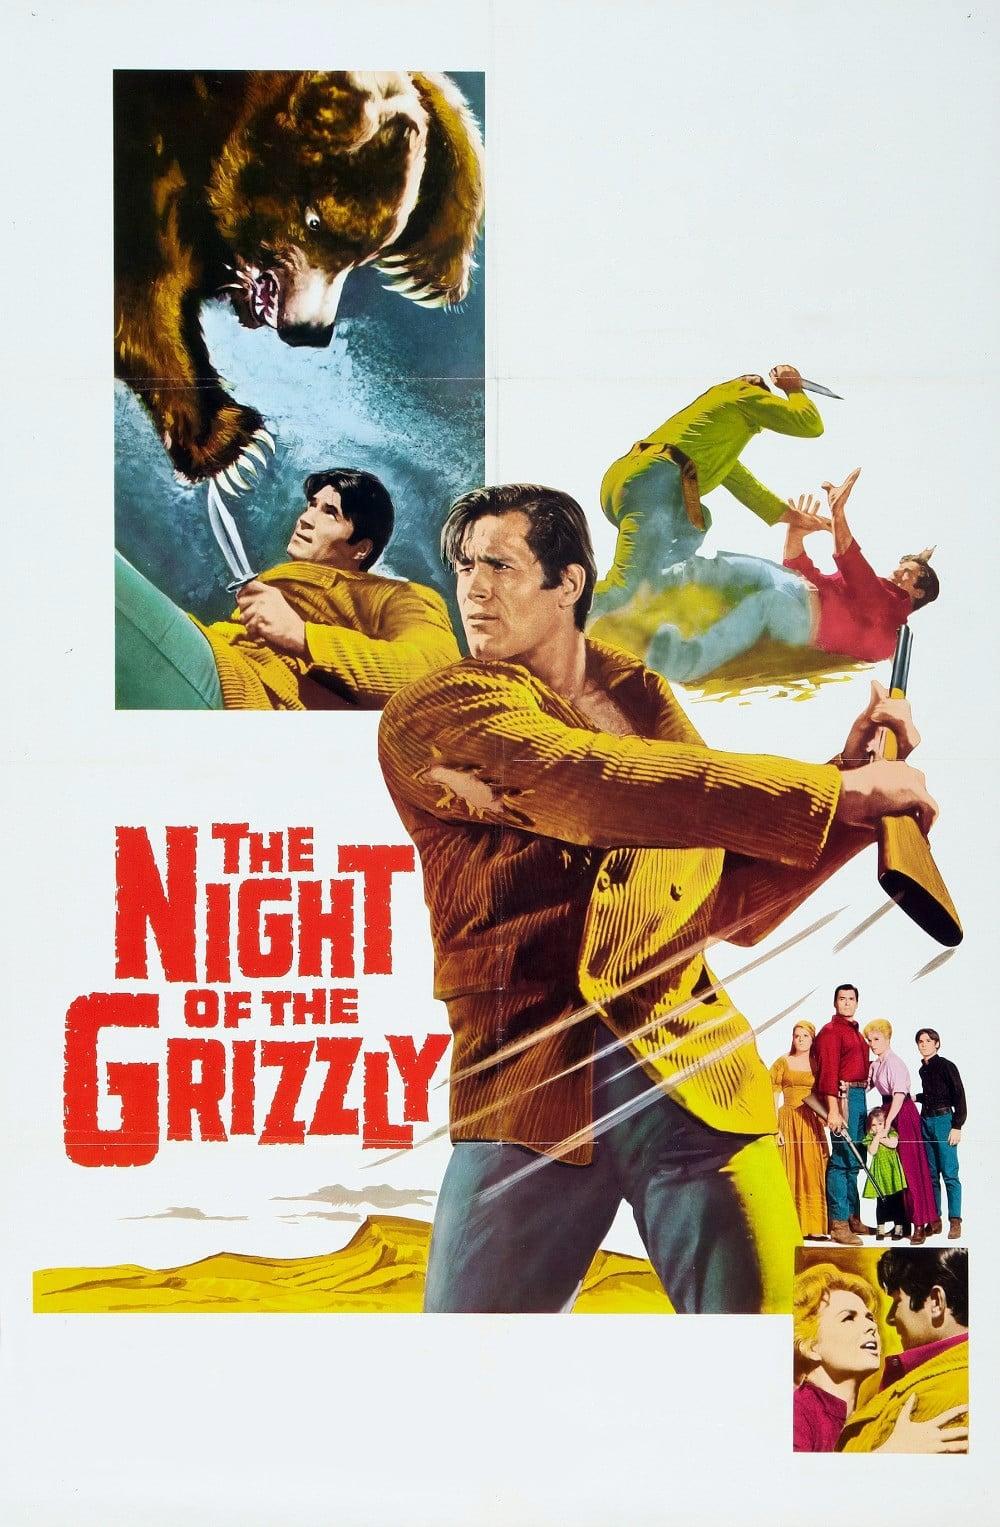 The Night of the Grizzly poster